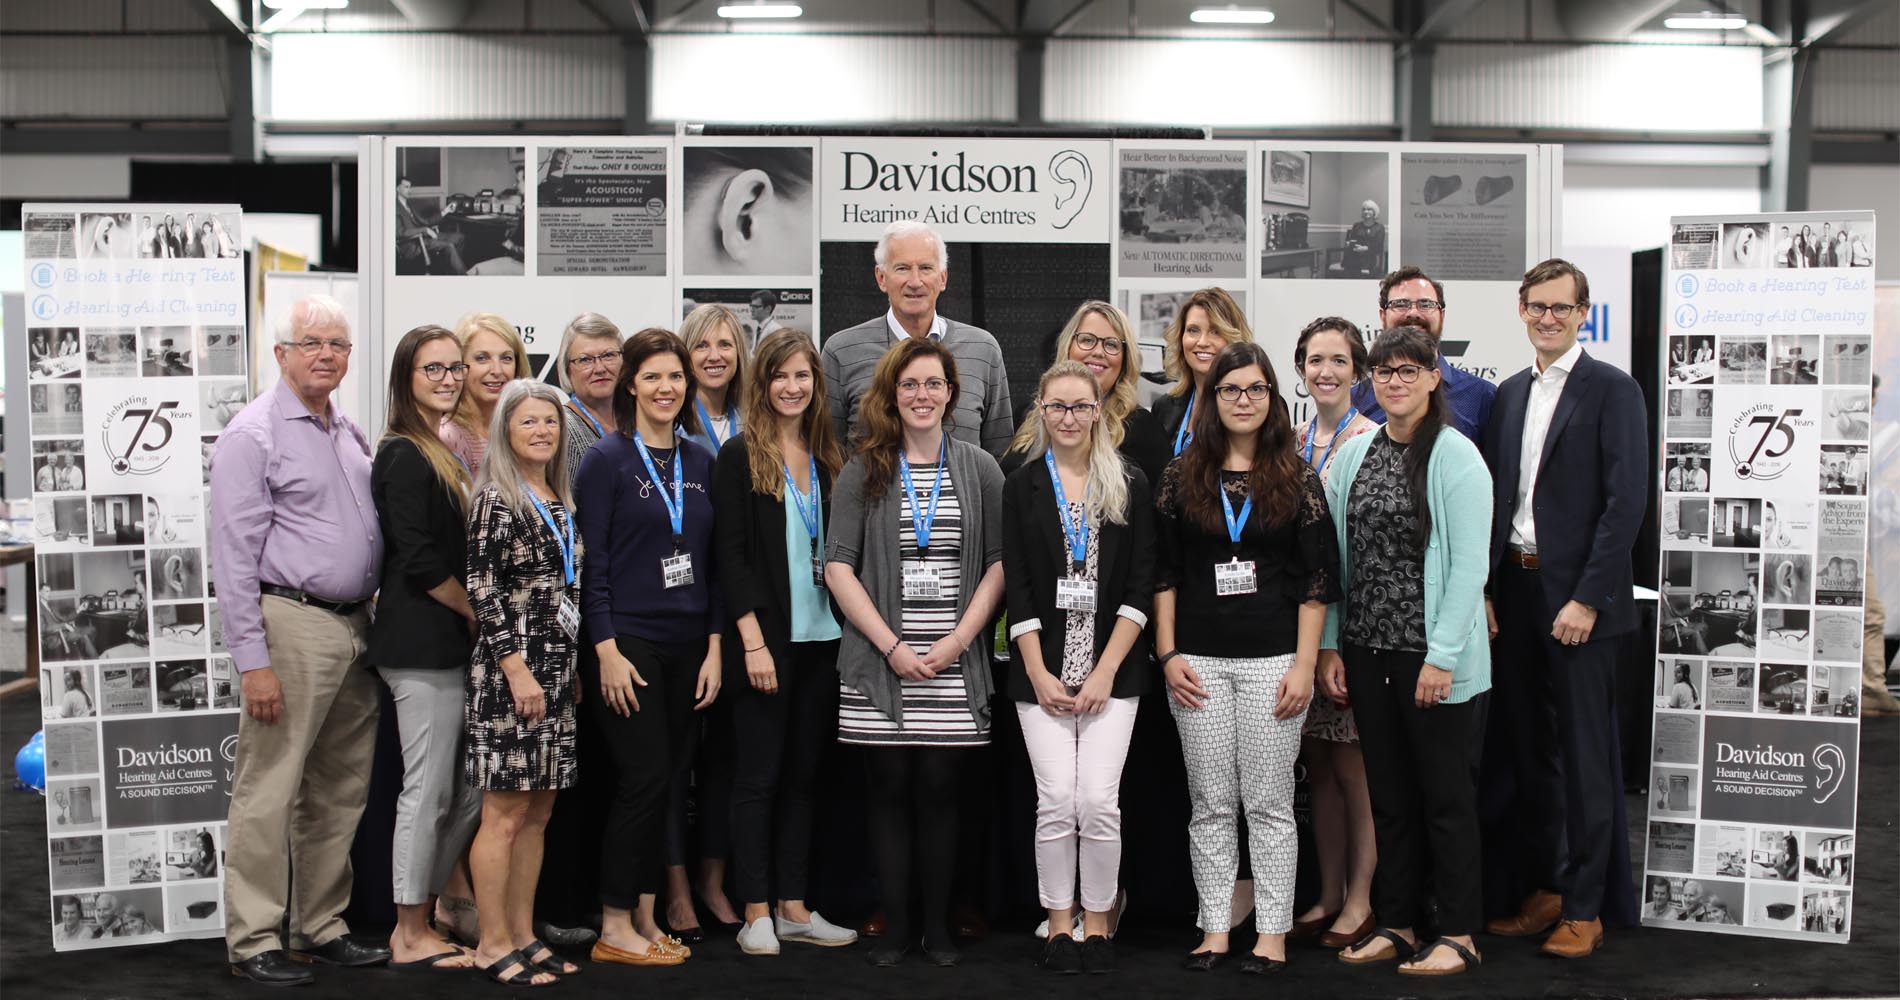 The Davidson Hearing Aid Centres team together at the Fifty-Five Plus Lifestyle Show